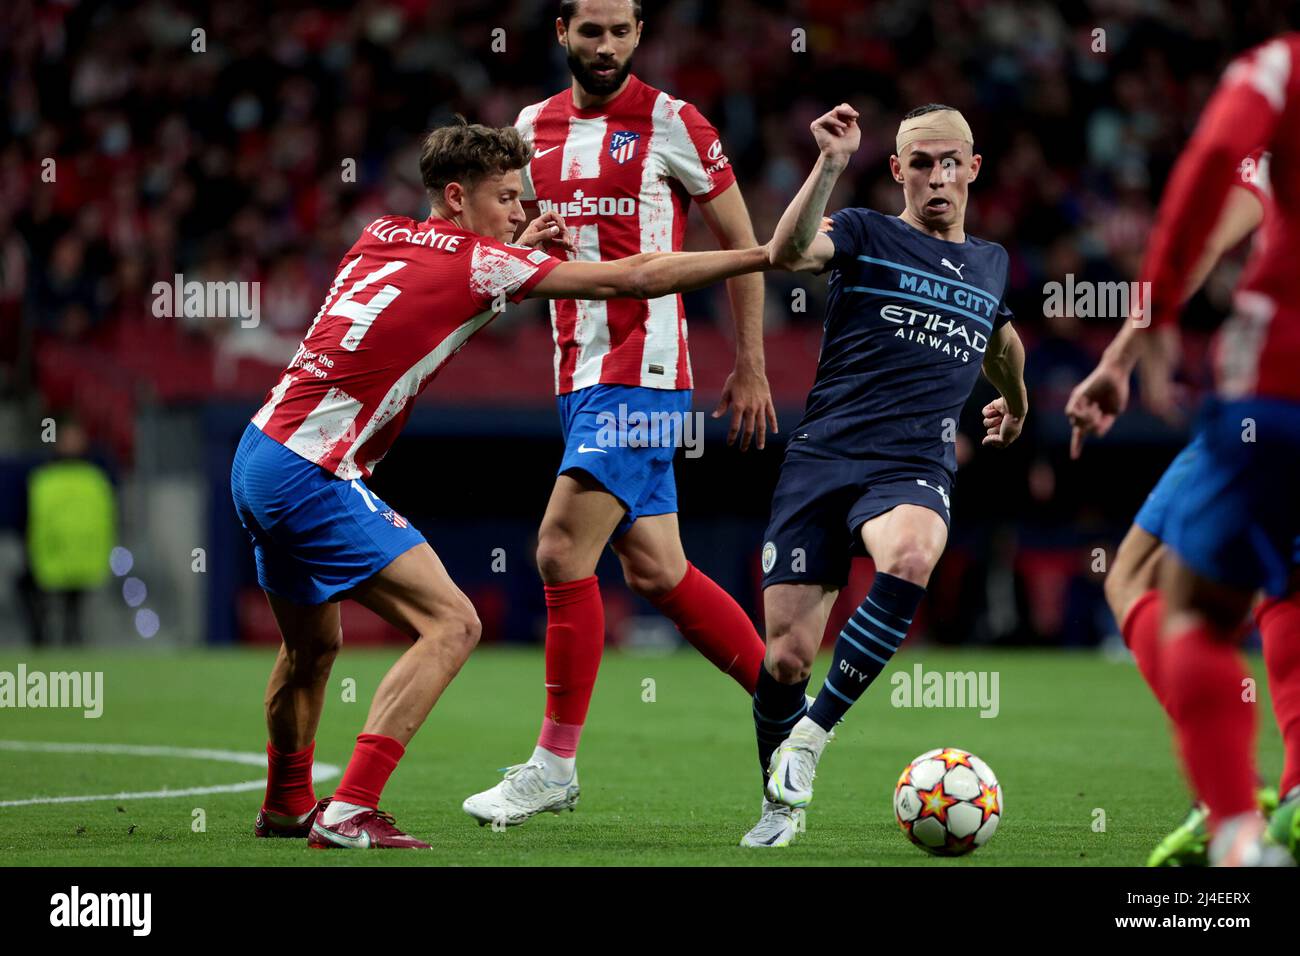 Madrid, Spanien. 13th Apr, 2022. Madrid, Spain; 13.04.2022.- Atletico de Madrid vs Manchester City Quarter finals 2nd leg Champions League, match held at the Wanda Metropolitano stadium in city of Madrid. Manchester player Phil Foden Final result 0-0 Overall result Atletico de Madrid 0 Chelsea 1 Credit: Juan Carlos RojasM/dpa/Alamy Live News Stock Photo